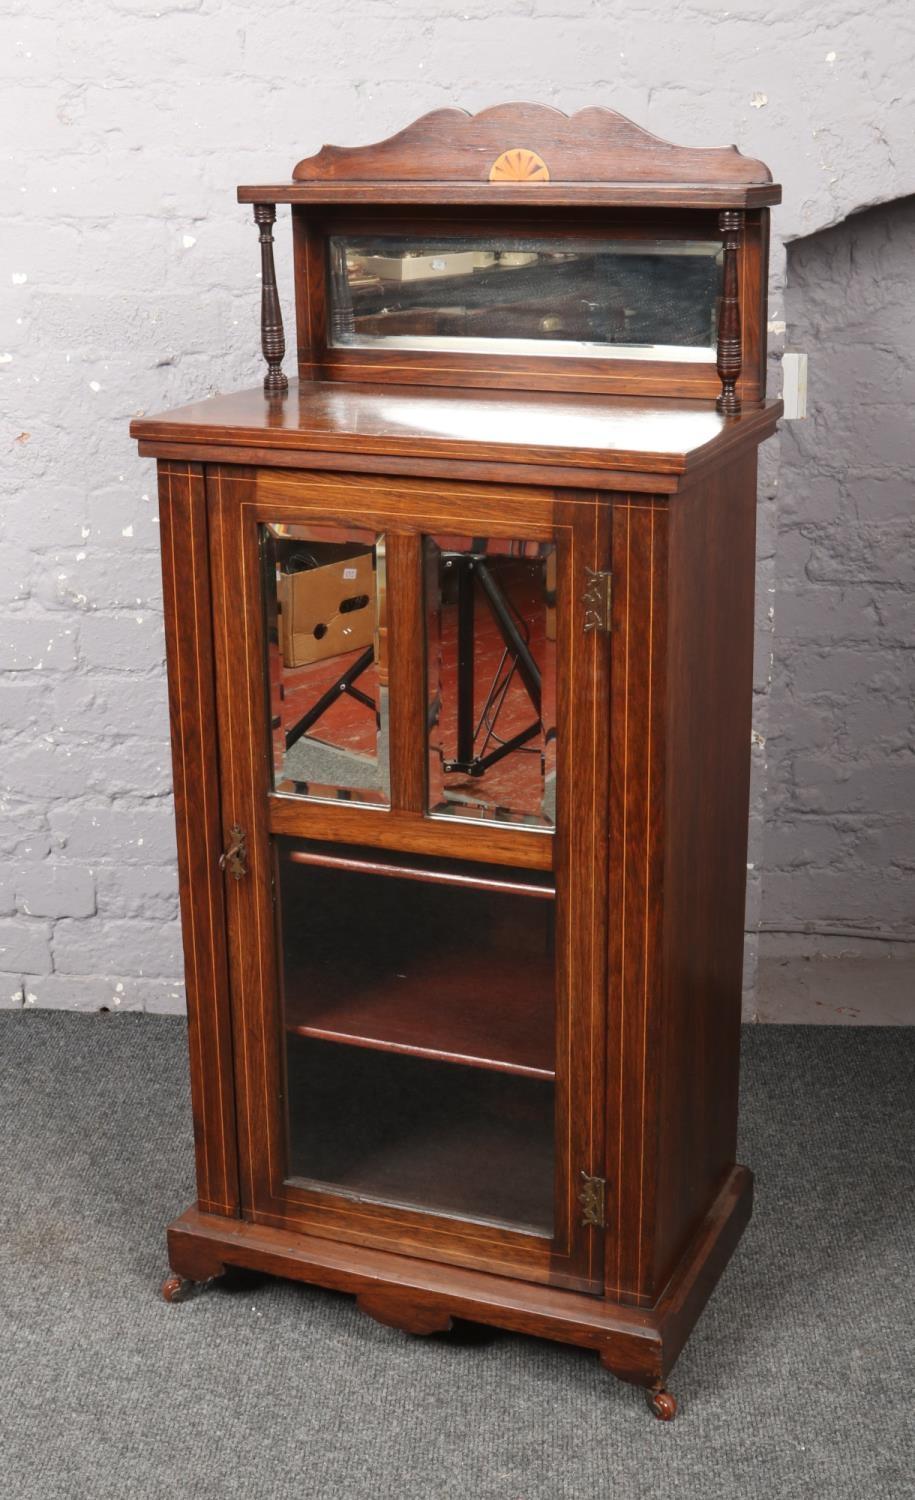 A rosewood mirror back cabinet. (Height 116cm, Width 55cm, Depth 35cm).